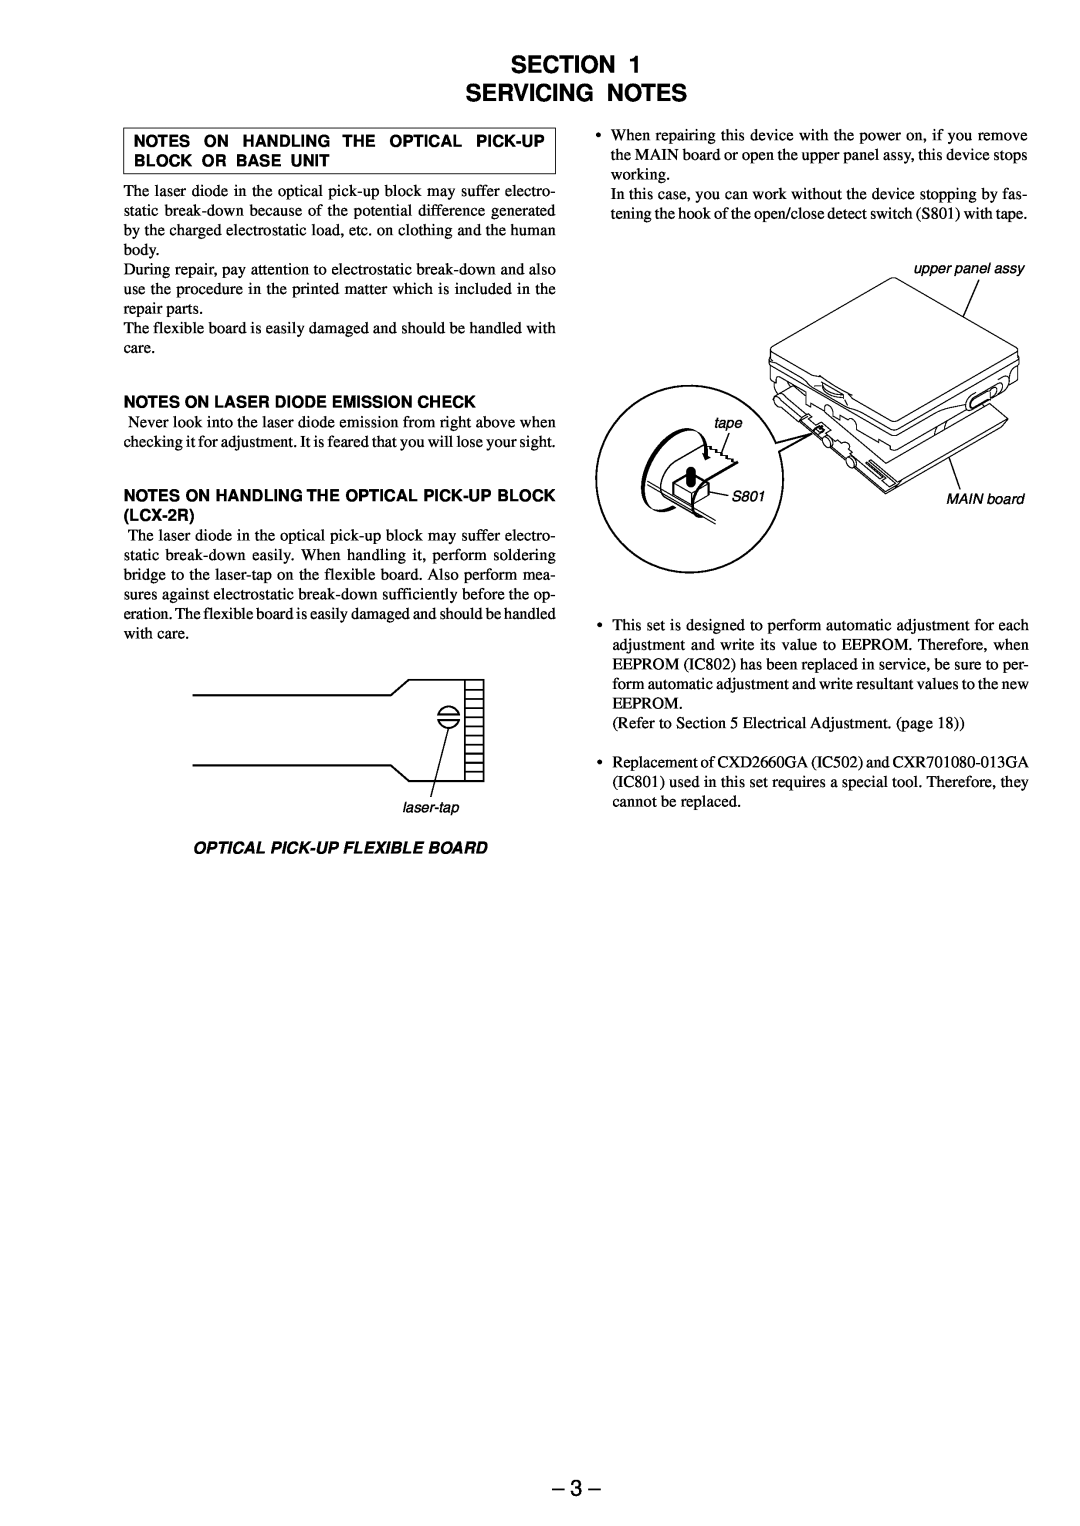 Sony MZ-R91 service manual Section Servicing Notes, Notes On Laser Diode Emission Check, Optical Pick-Upflexible Board 